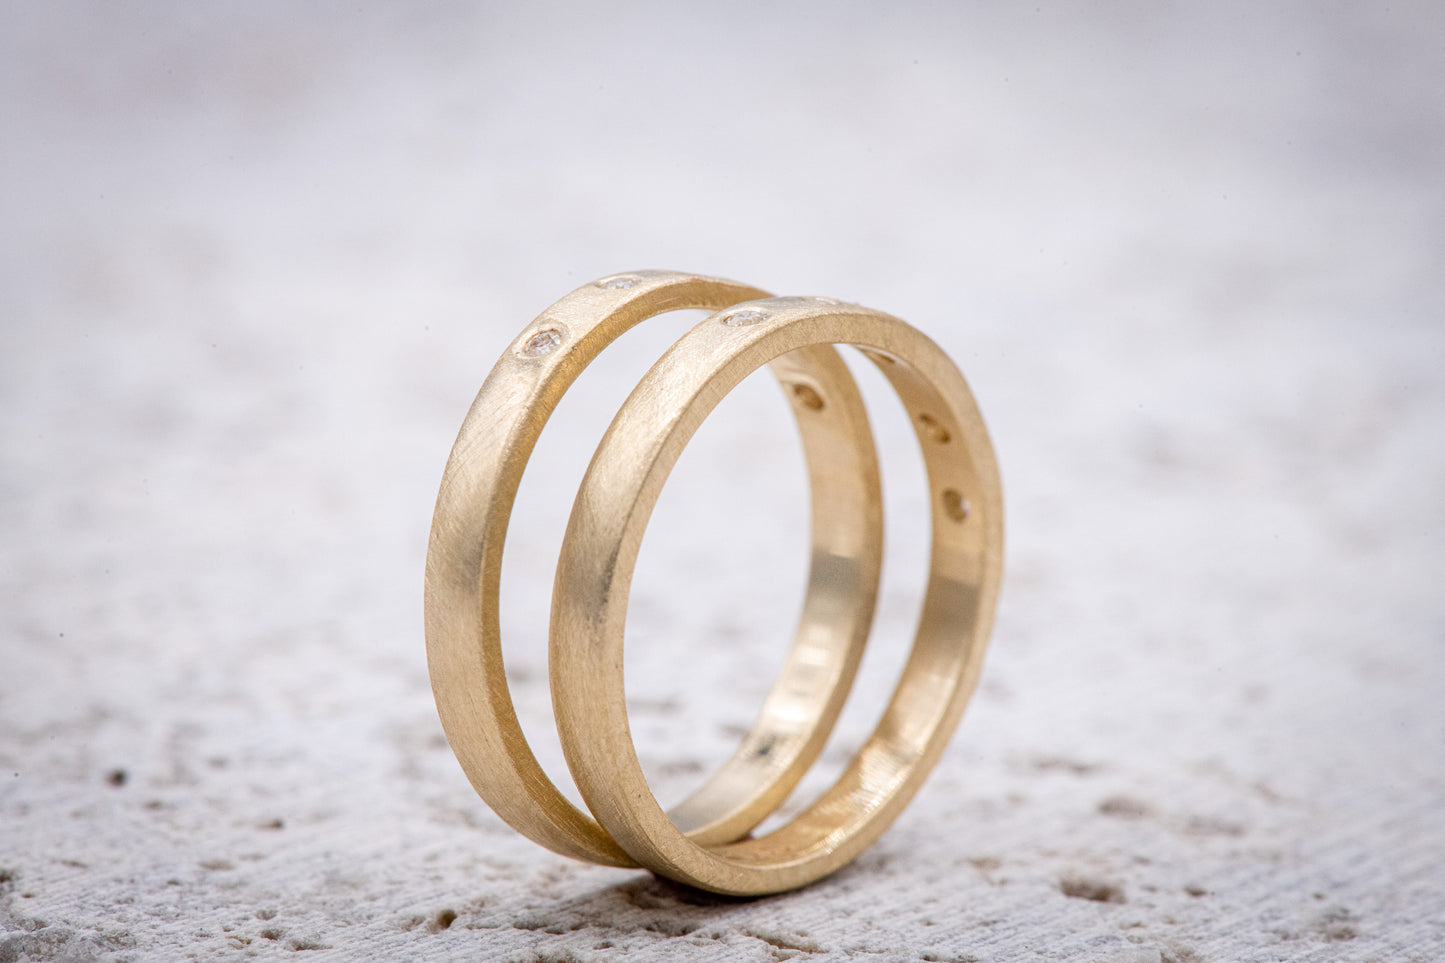 Two handmade Moissanite Gold Wedding Bands on a concrete surface.